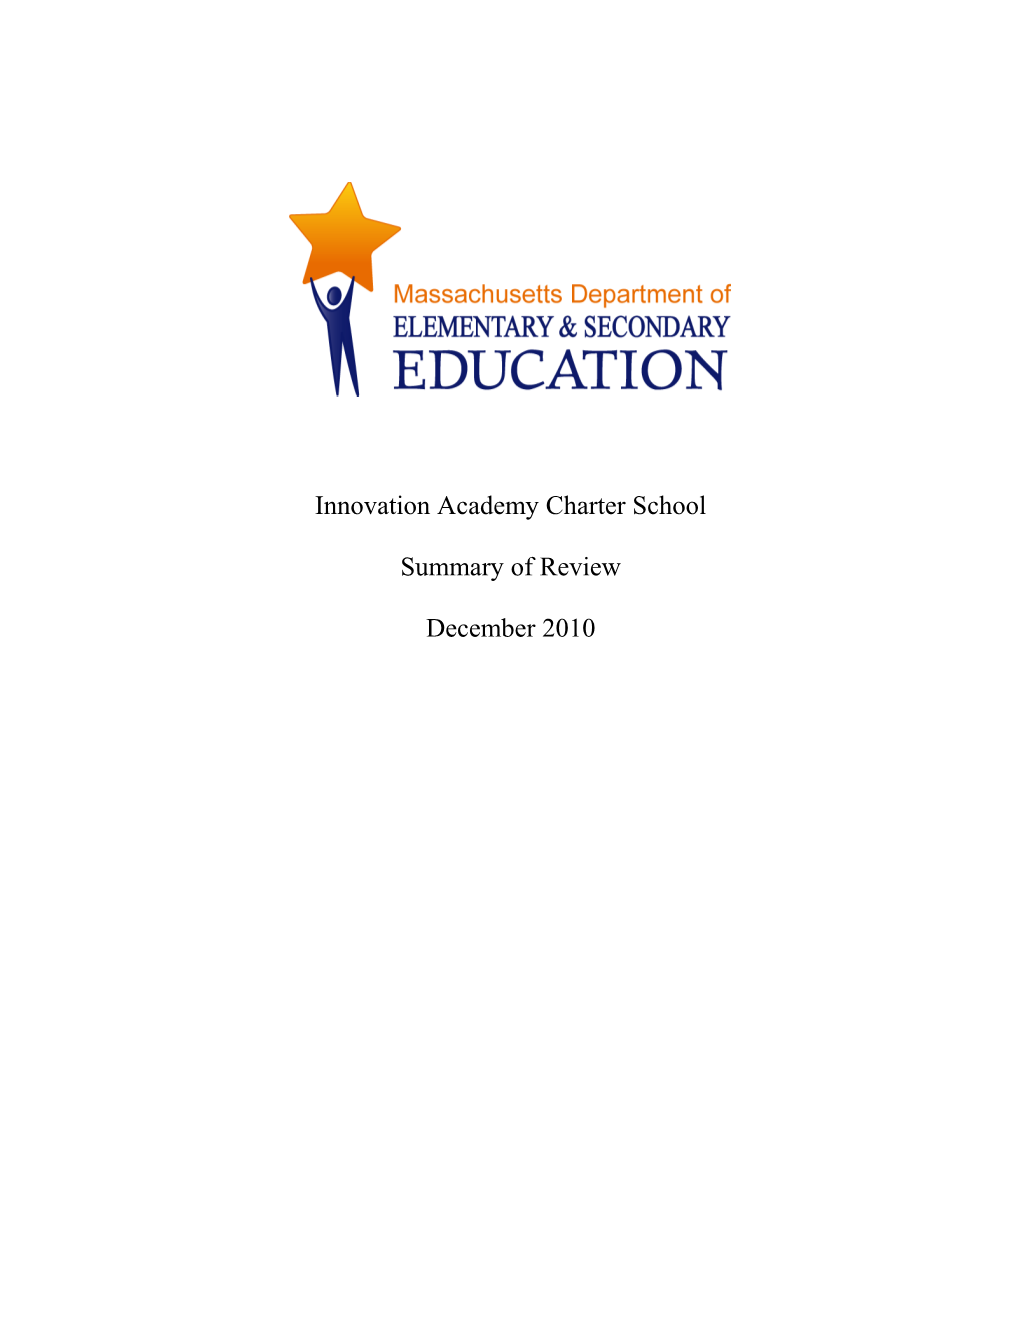 Innovation Academy Charter School Summary of Review